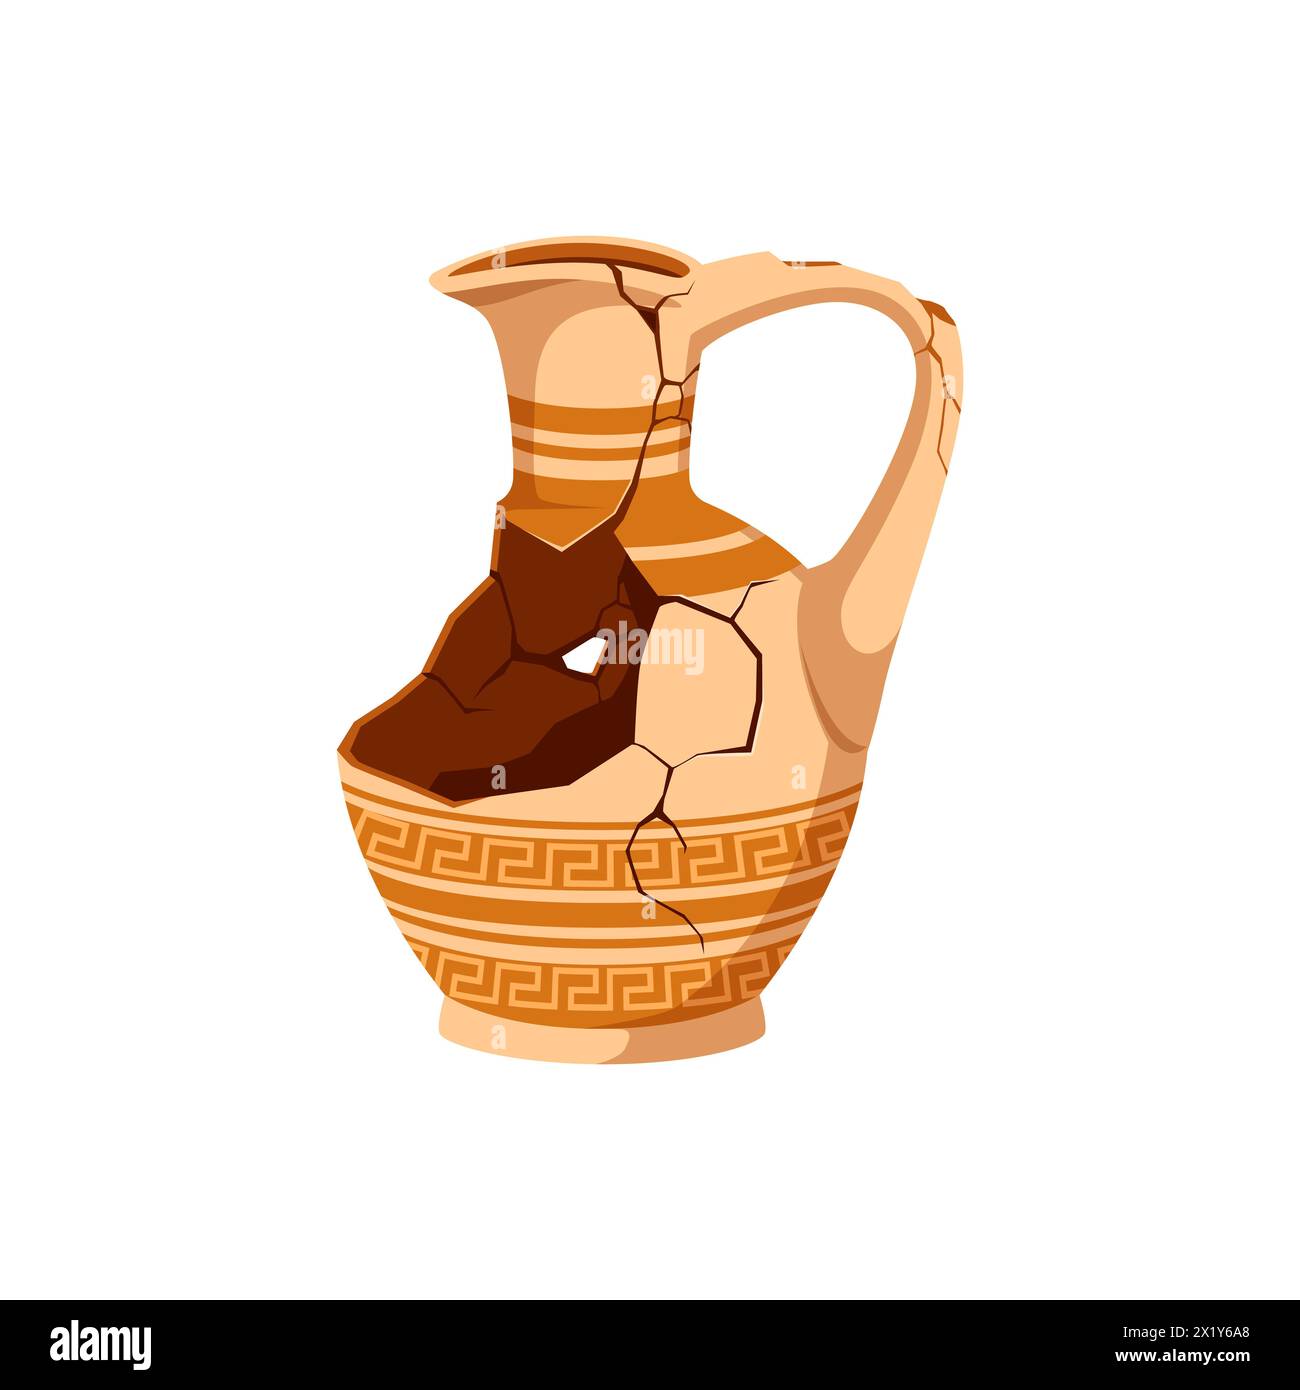 Ancient broken pottery and vase. Old ceramic cracked pot or jug. Isolated cartoon vector greek or roman earthenware pitcher with cracks, hole, pattern and handle. Vessel for wine, museum artefact Stock Vector